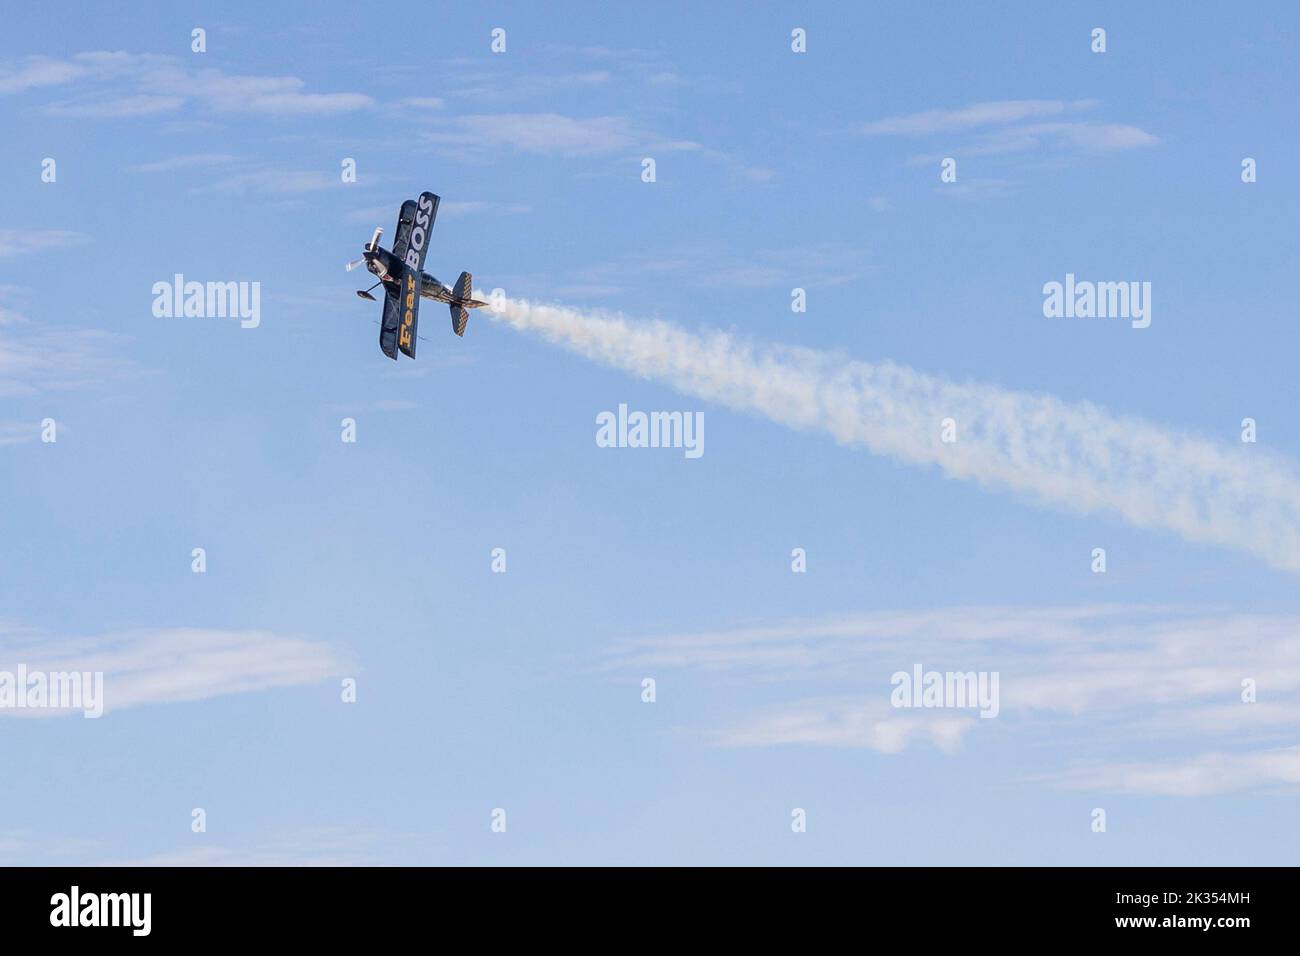 Jon Melby, piloting his Pitts S-1B Muscle Bi-Plane, performs aerobatics during the 2022 Marine Corps Air Station Miramar Air Show at MCAS Miramar, San Diego, California, Sept. 24, 2022. Melby has been performing at air shows since 2001. The theme for the 2022 MCAS Miramar Air Show, “Marines Fight, Evolve and Win,” reflects the Marine Corps’ ongoing modernization efforts to prepare for future conflicts. (U.S. Marine Corps photo by Lance Cpl. Bradley Ahrens) Stock Photo